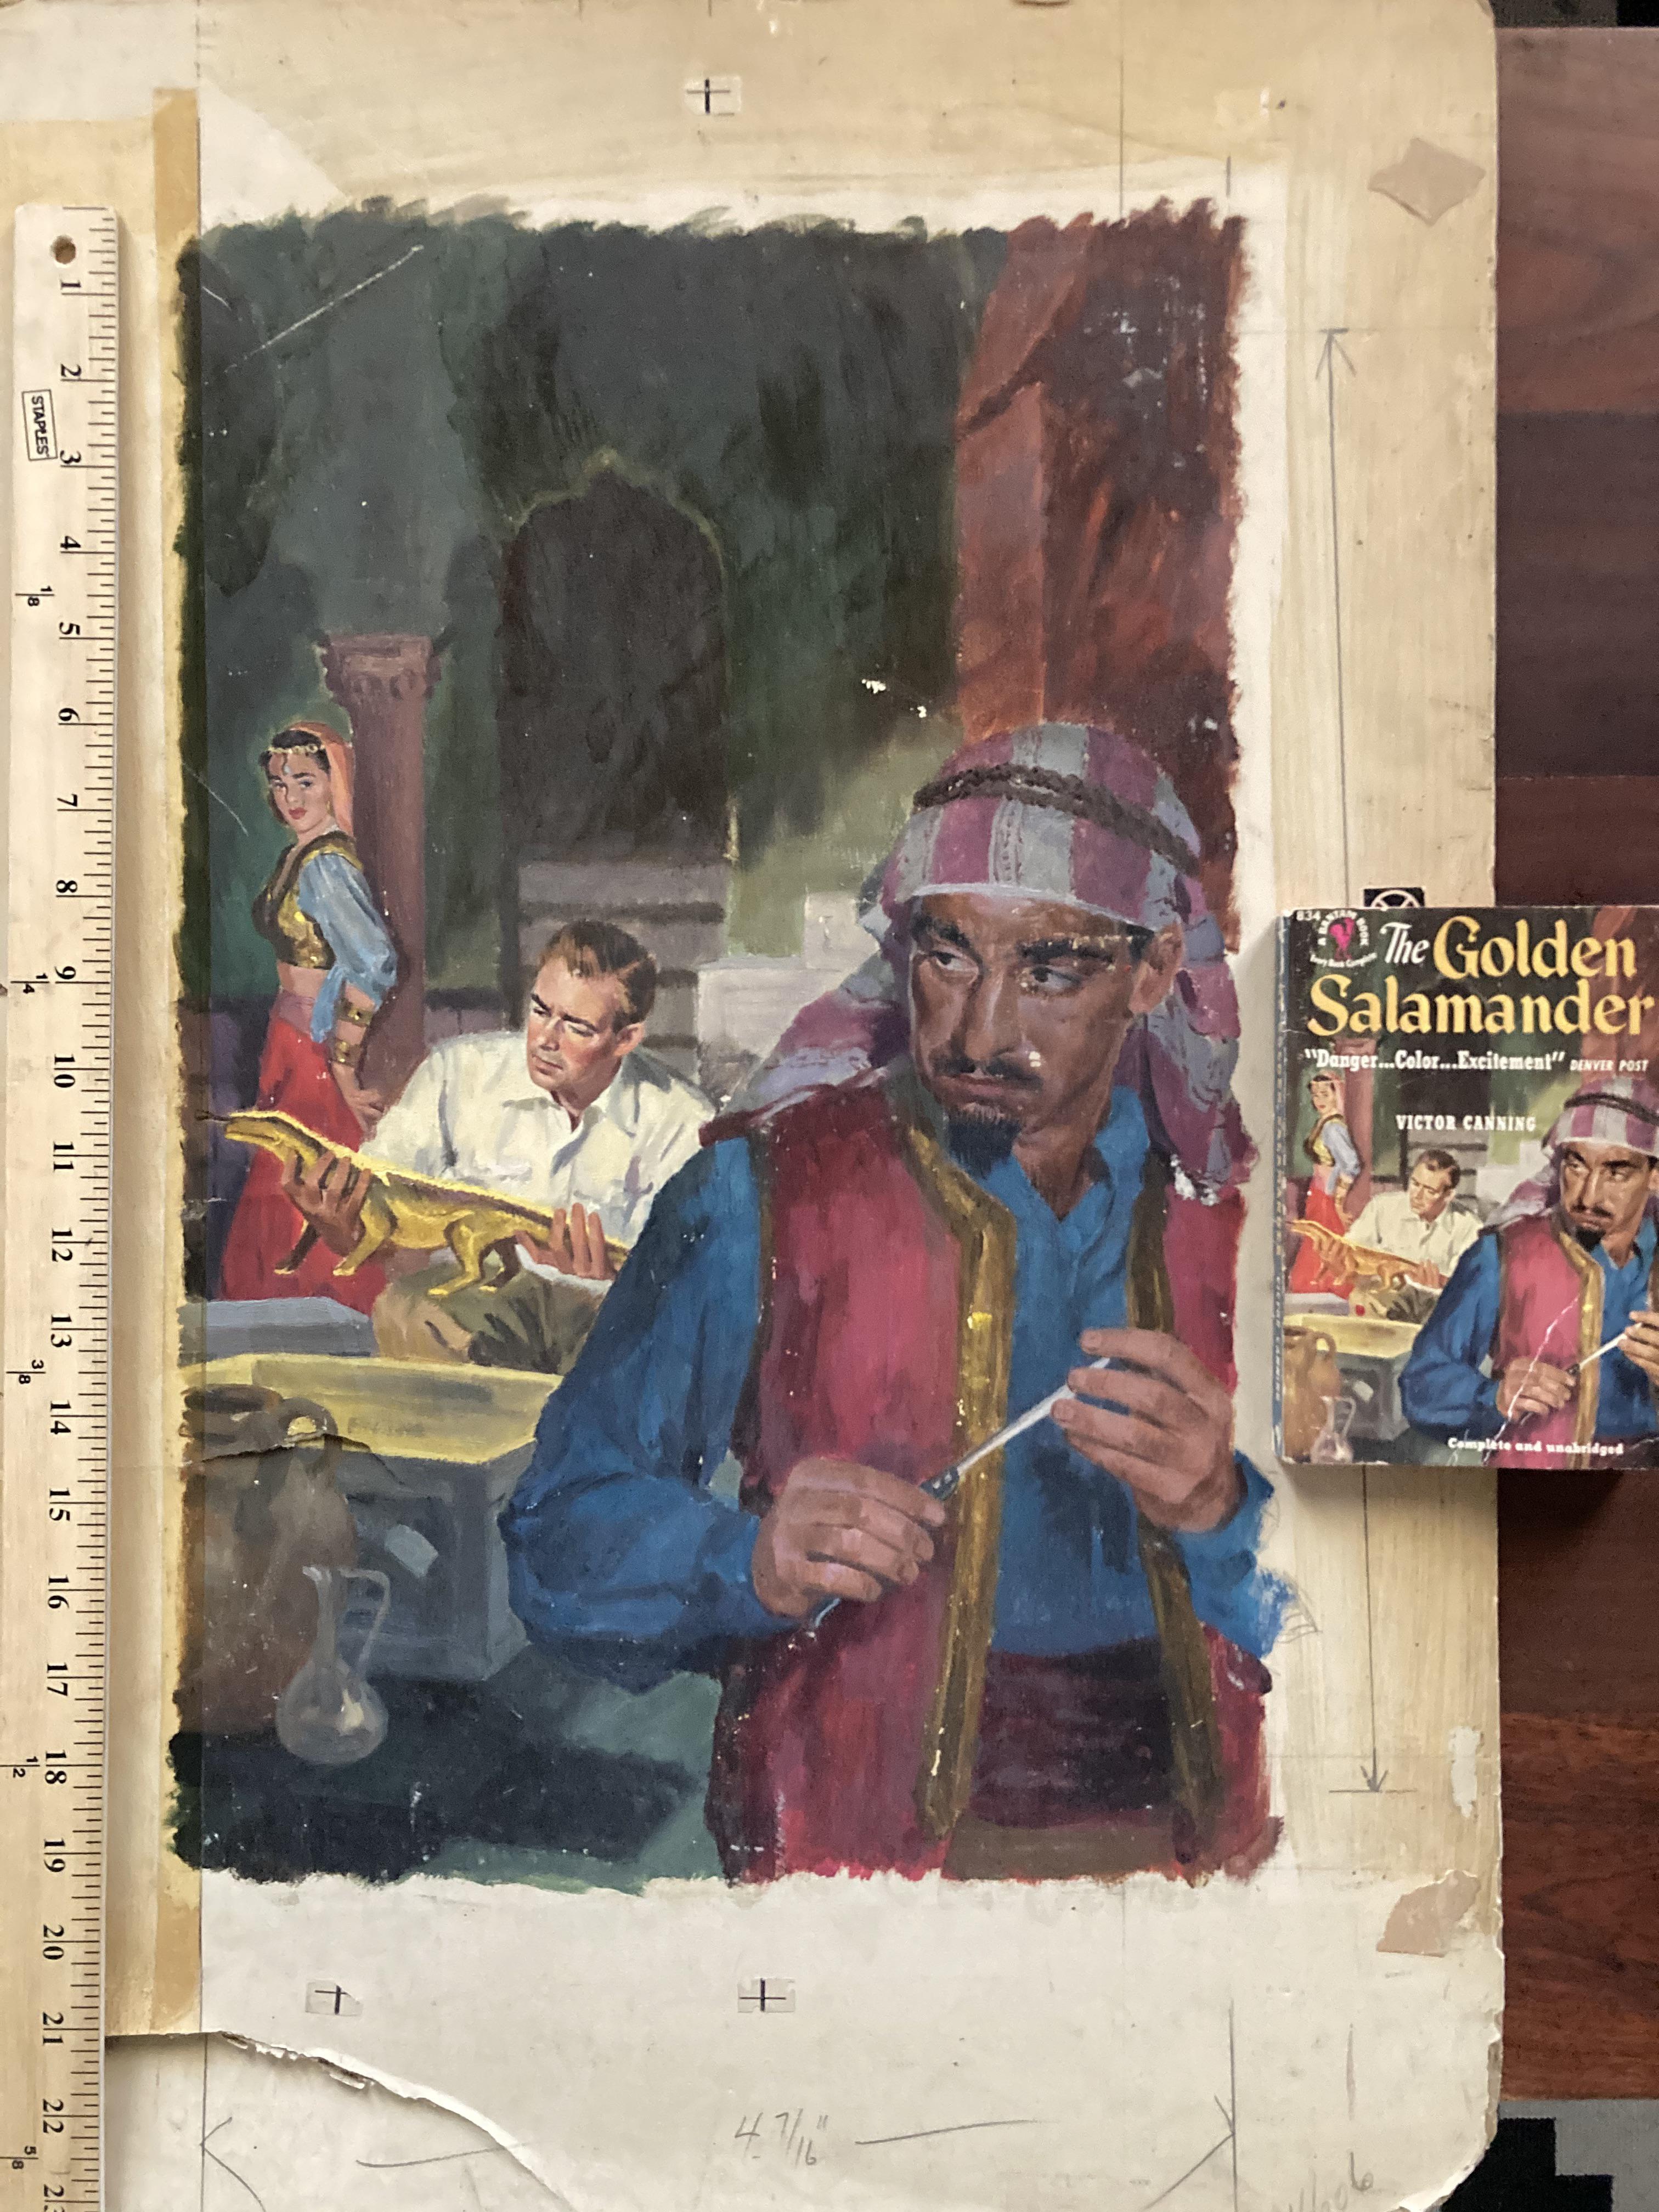 I found this painting at a local antique mall. After lots of detective work I discovered it was created for this book The Golden Salamander 1949-50 (book bought on eBay).jpg